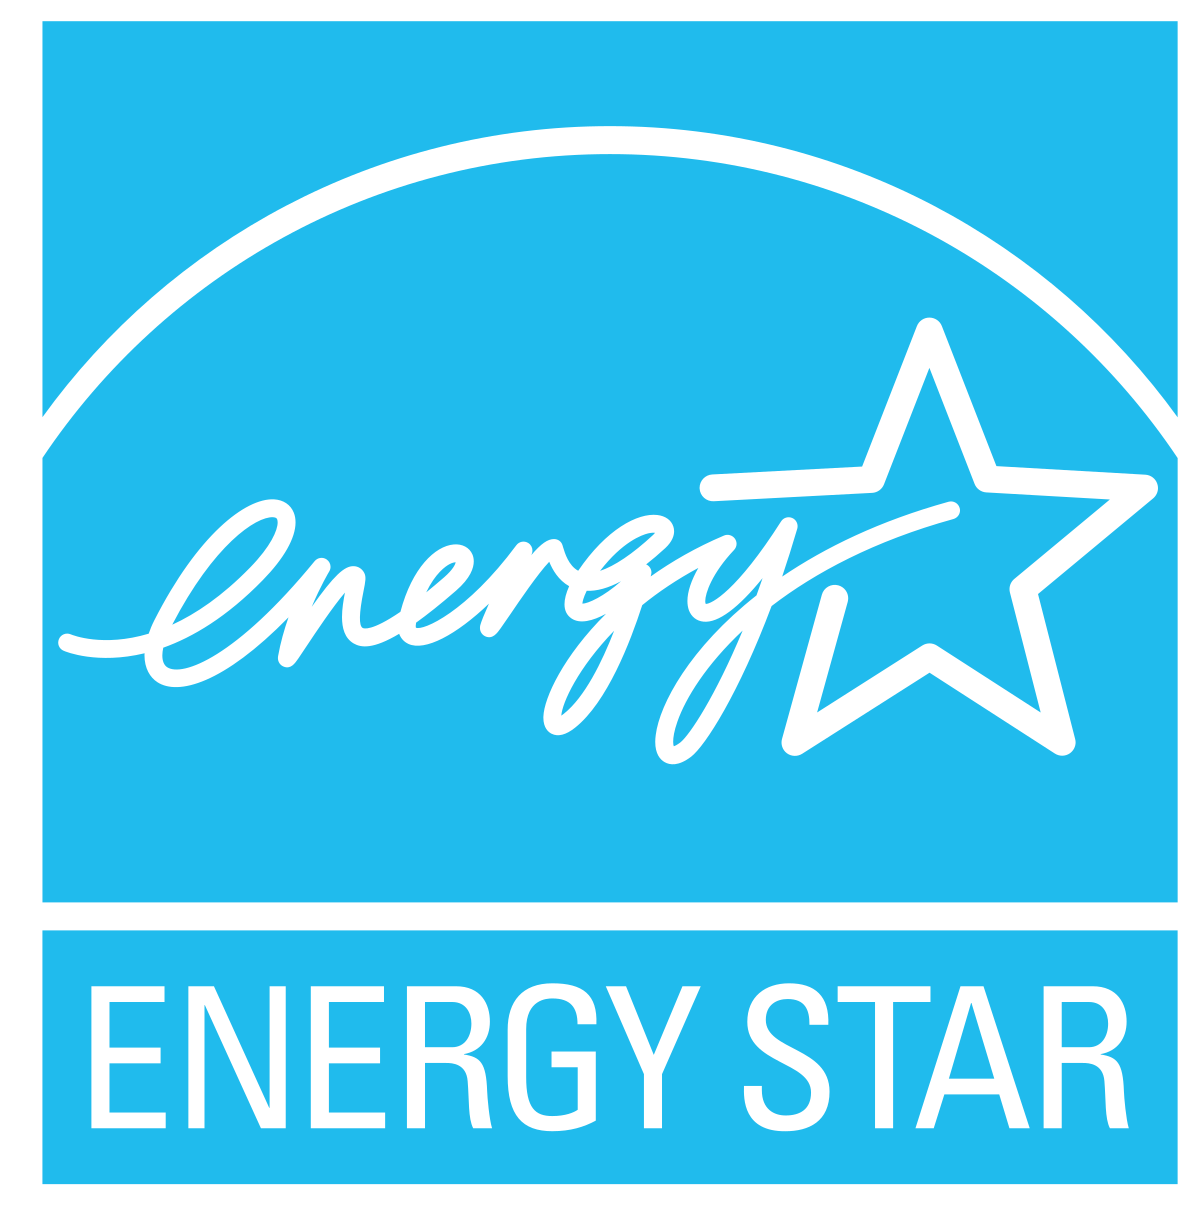 Image with Energy Star star text along with a star